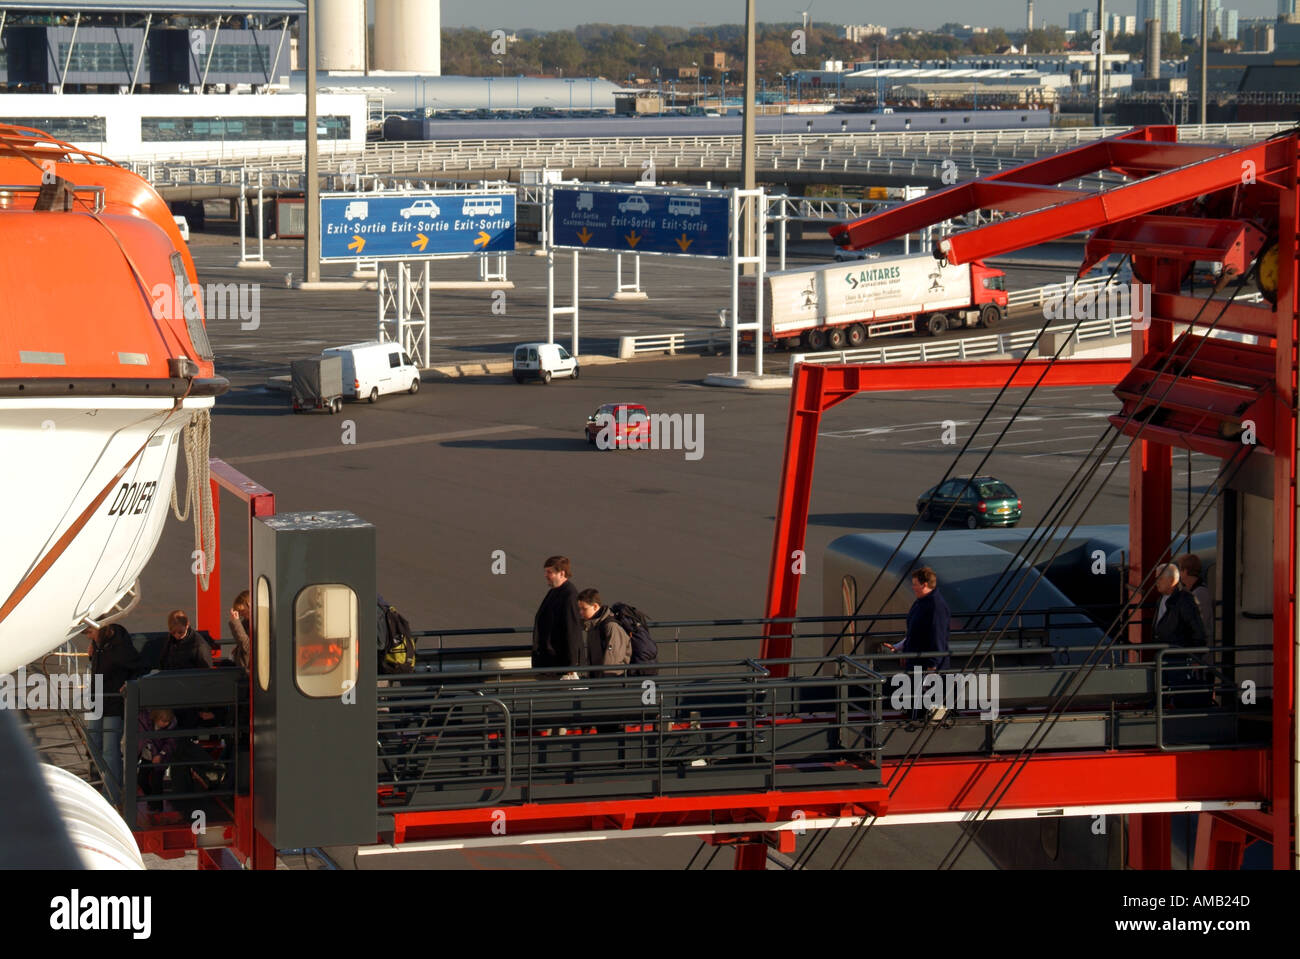 Calais cross channel ferry terminal ramp provided for foot passengers to board P O ferry for crossing to Dover Kent England UK Stock Photo